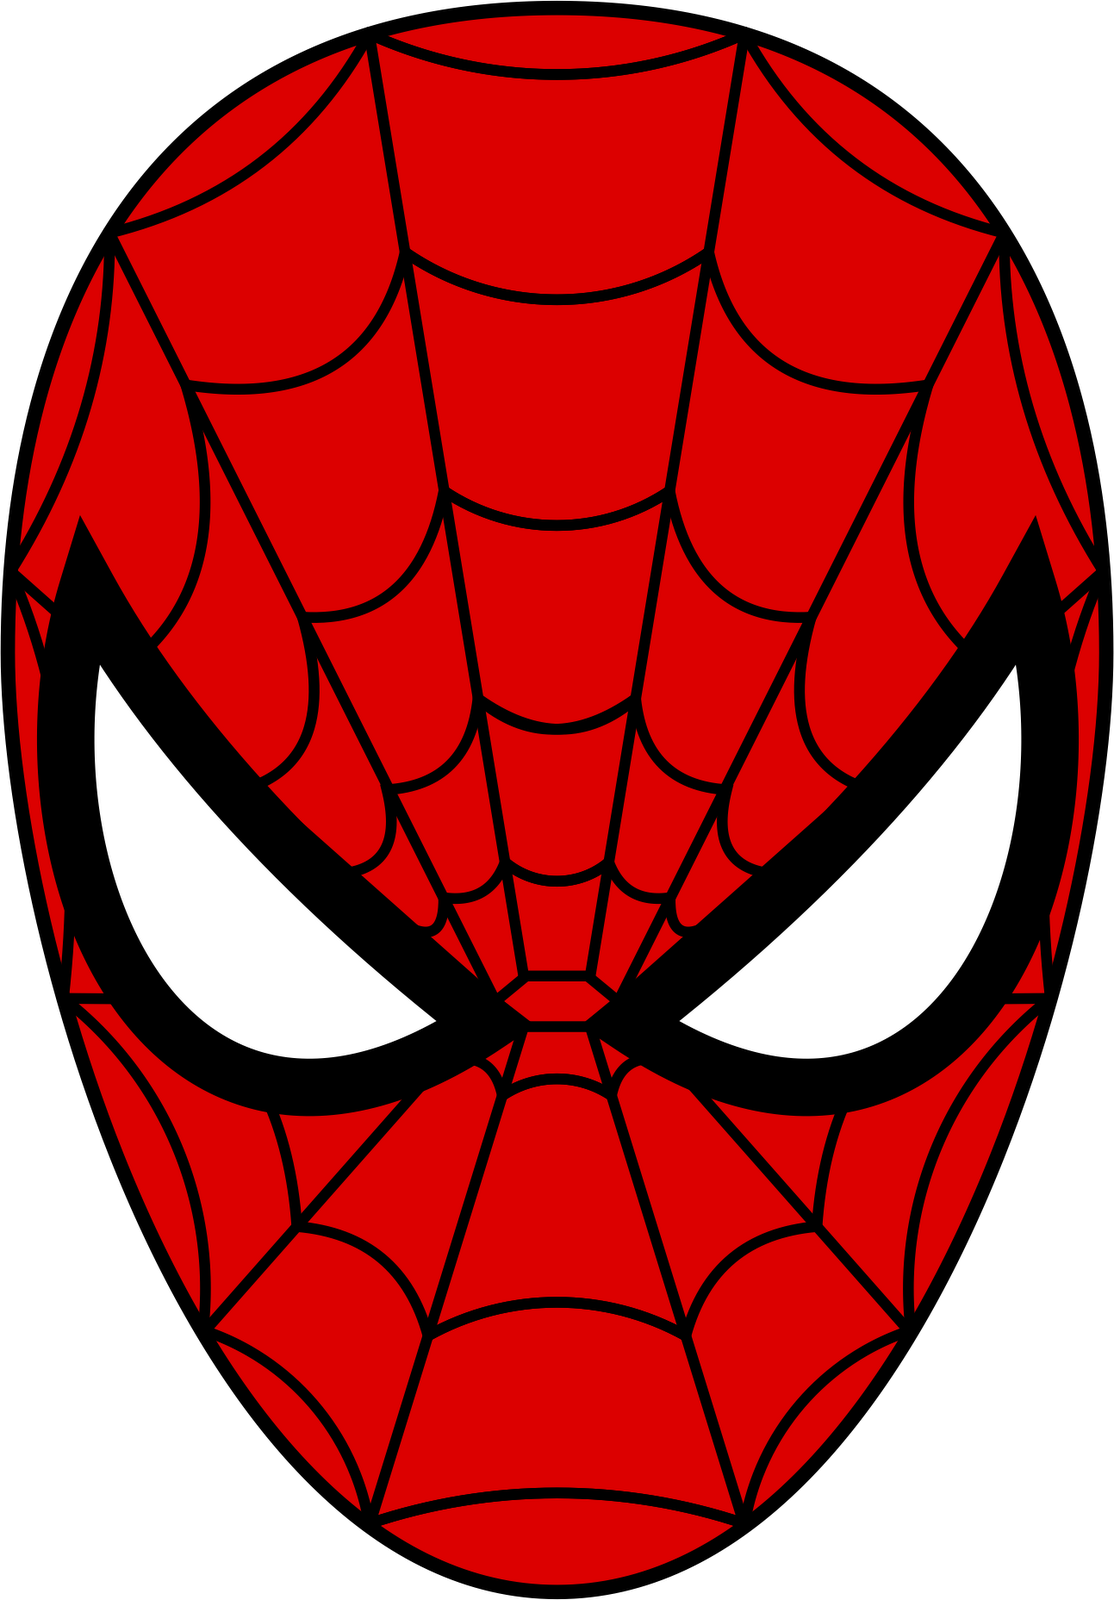 Spiderman Face drawing free image download